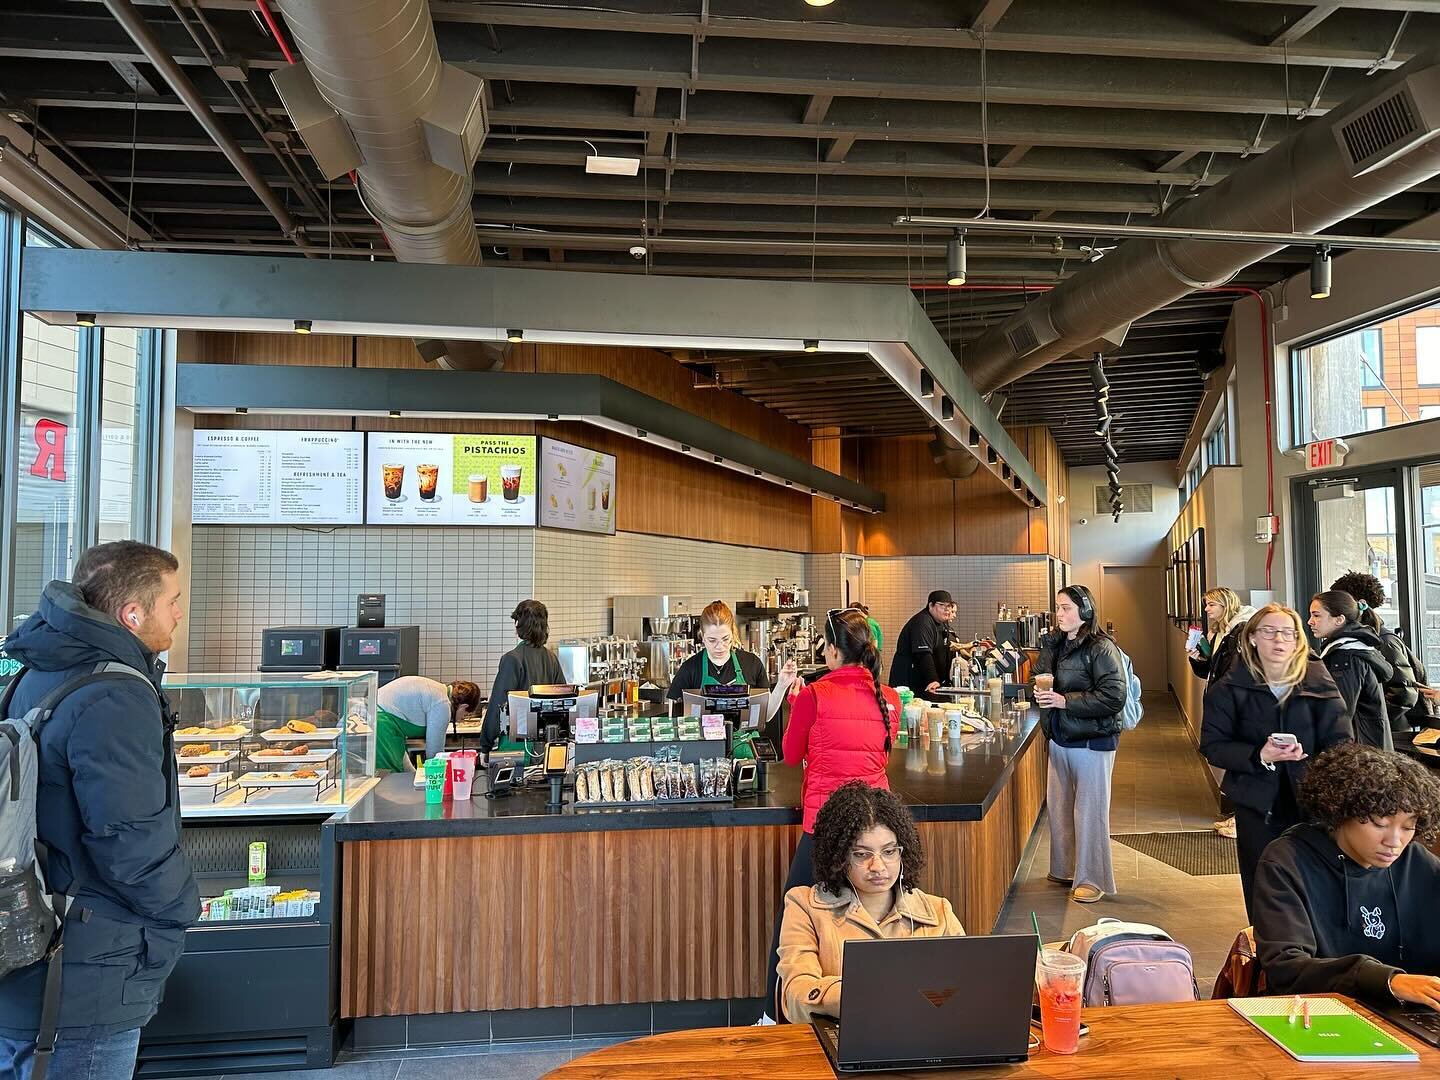 @theyardbux is re-open after some renovations! Stop in for your caffeine fix today! ☕️
.
.
#theyard #theyardru #theyardrutgers #theyardatcollegeave #collegeave #newbrunswick #newbrunswicknj #ru #rutgers #rutgersu #rutgersuniversity #rutgersnewbrunswi